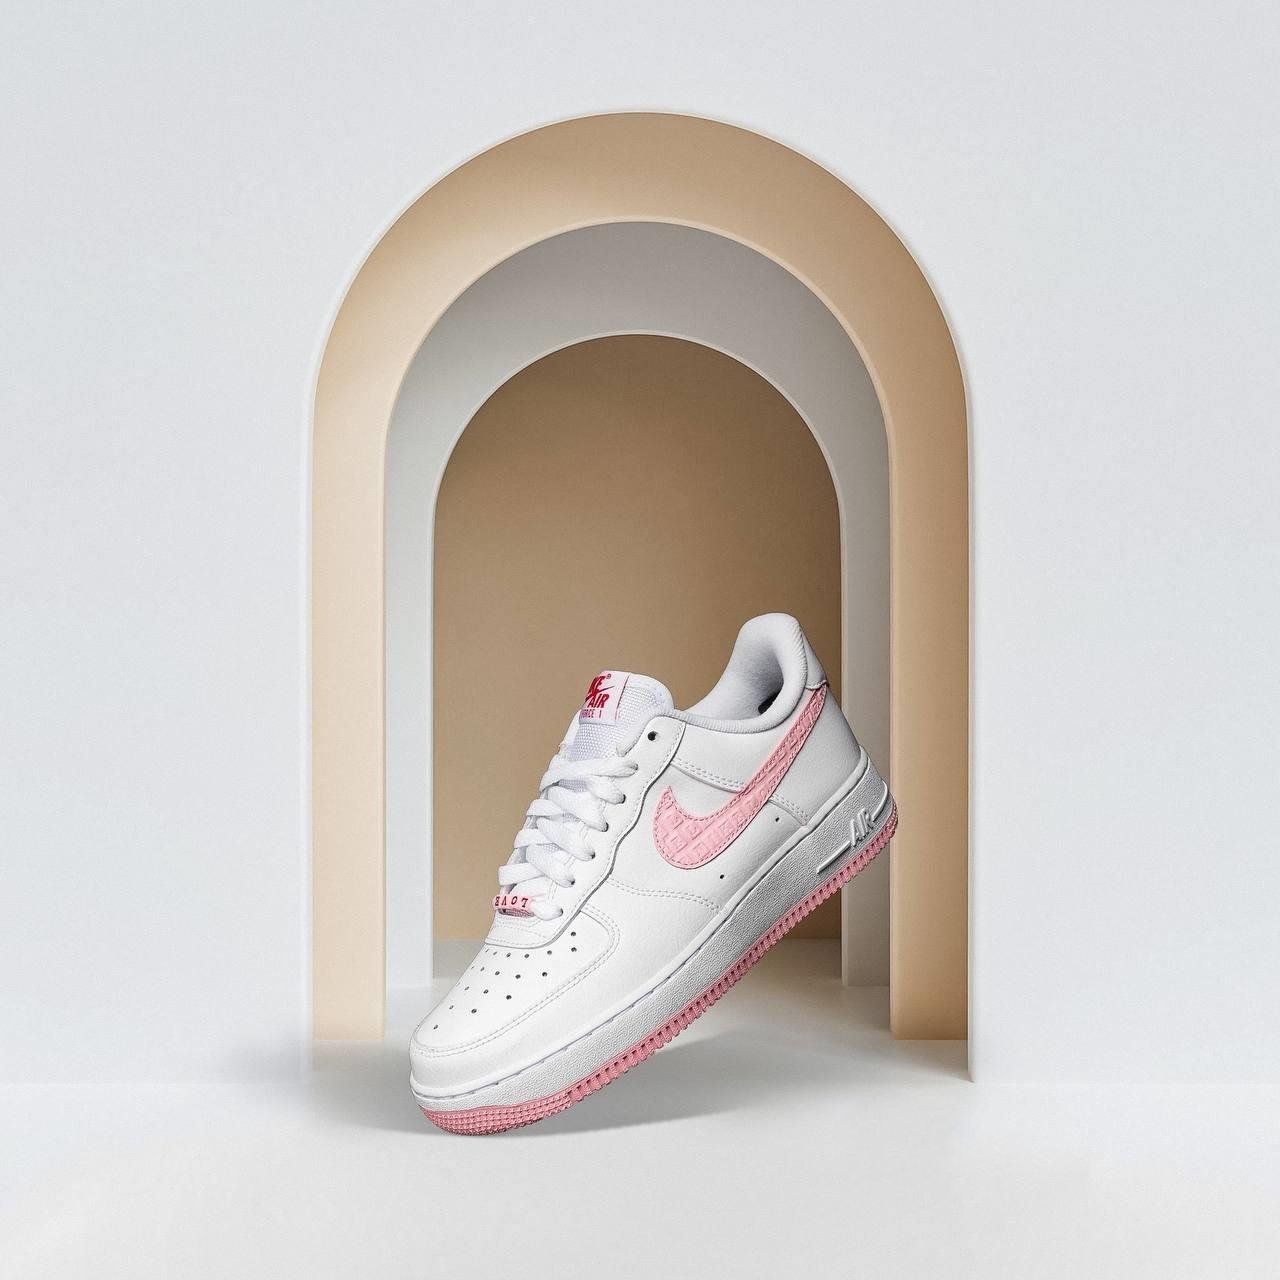 GIÀY THỂ THAO NỮ NIKE AIR FORCE 1 07 LOW VD VALENTINE´S DAY WHITE ATMOSPHERE UNIVERSITY RED SAIL DQ9320-100 8